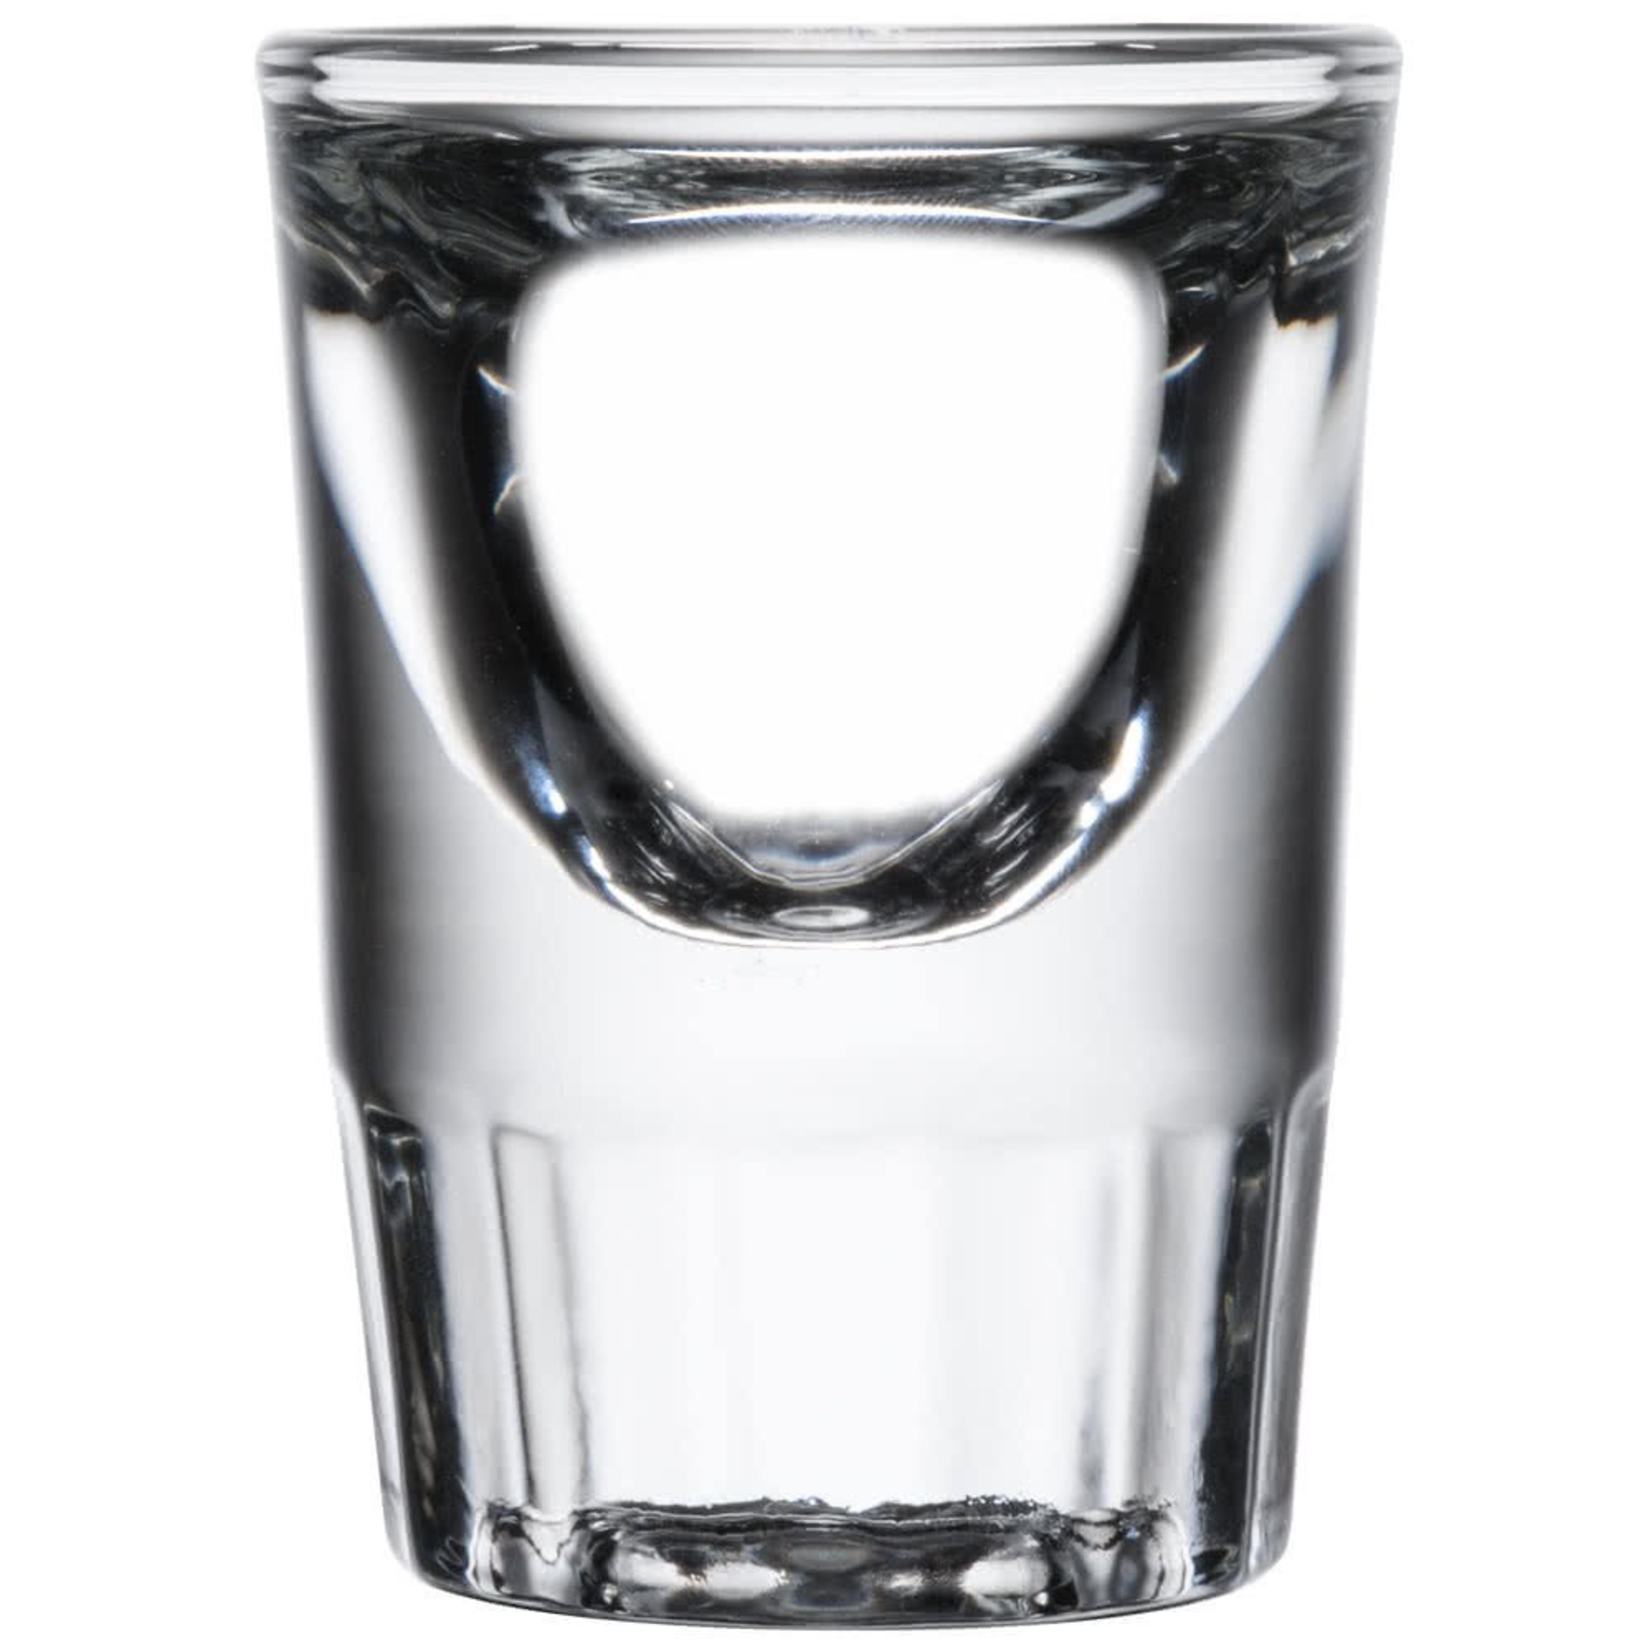 SOUTHWEST GLASSWARE Special order 5135 Libbey 1.25 oz Fluted Whiskey Shot Glass